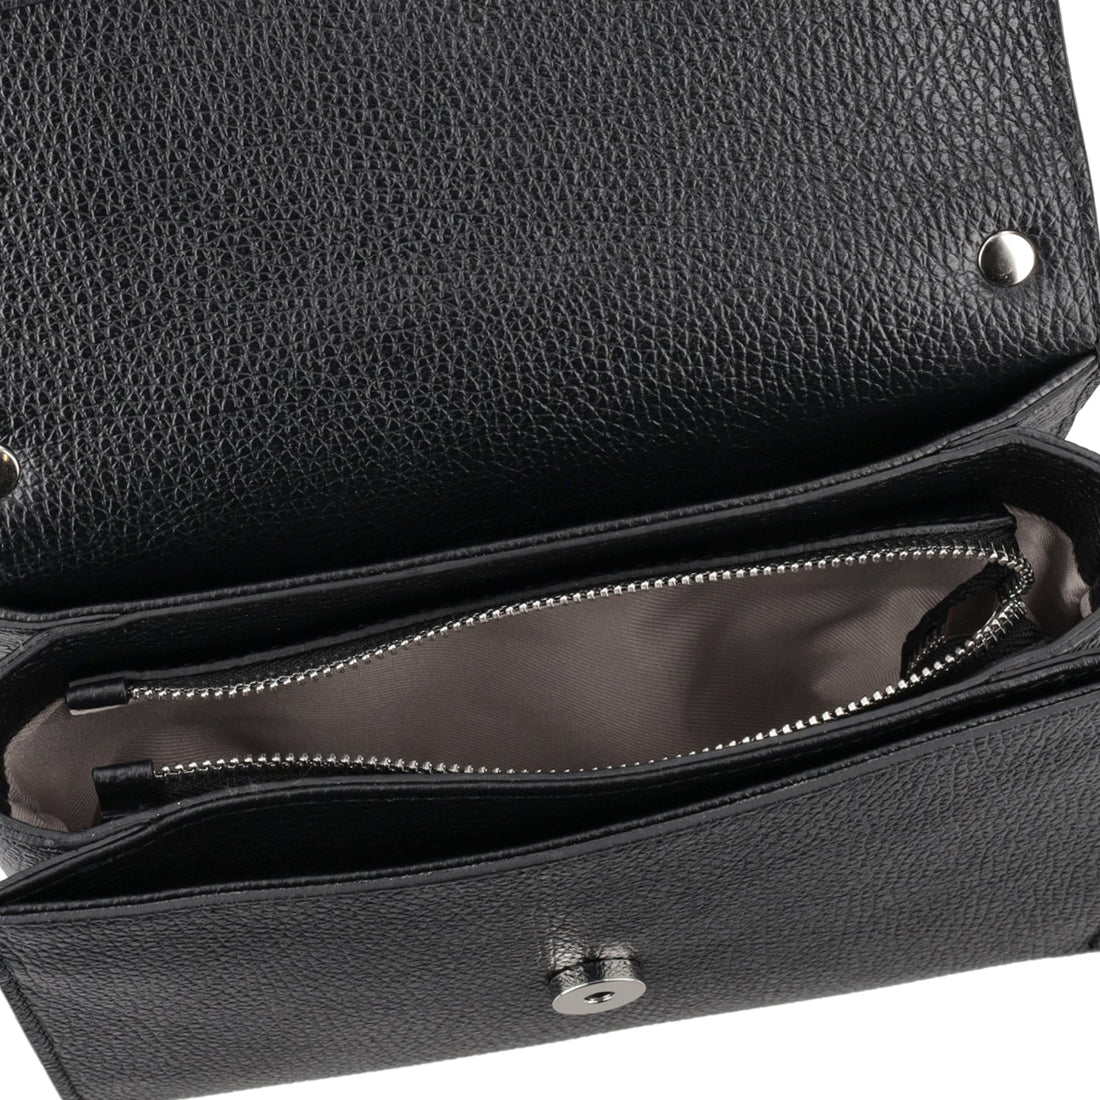 BLACK NARCISO HAND BAG IN LEATHER WITH SHOULDER STRAP